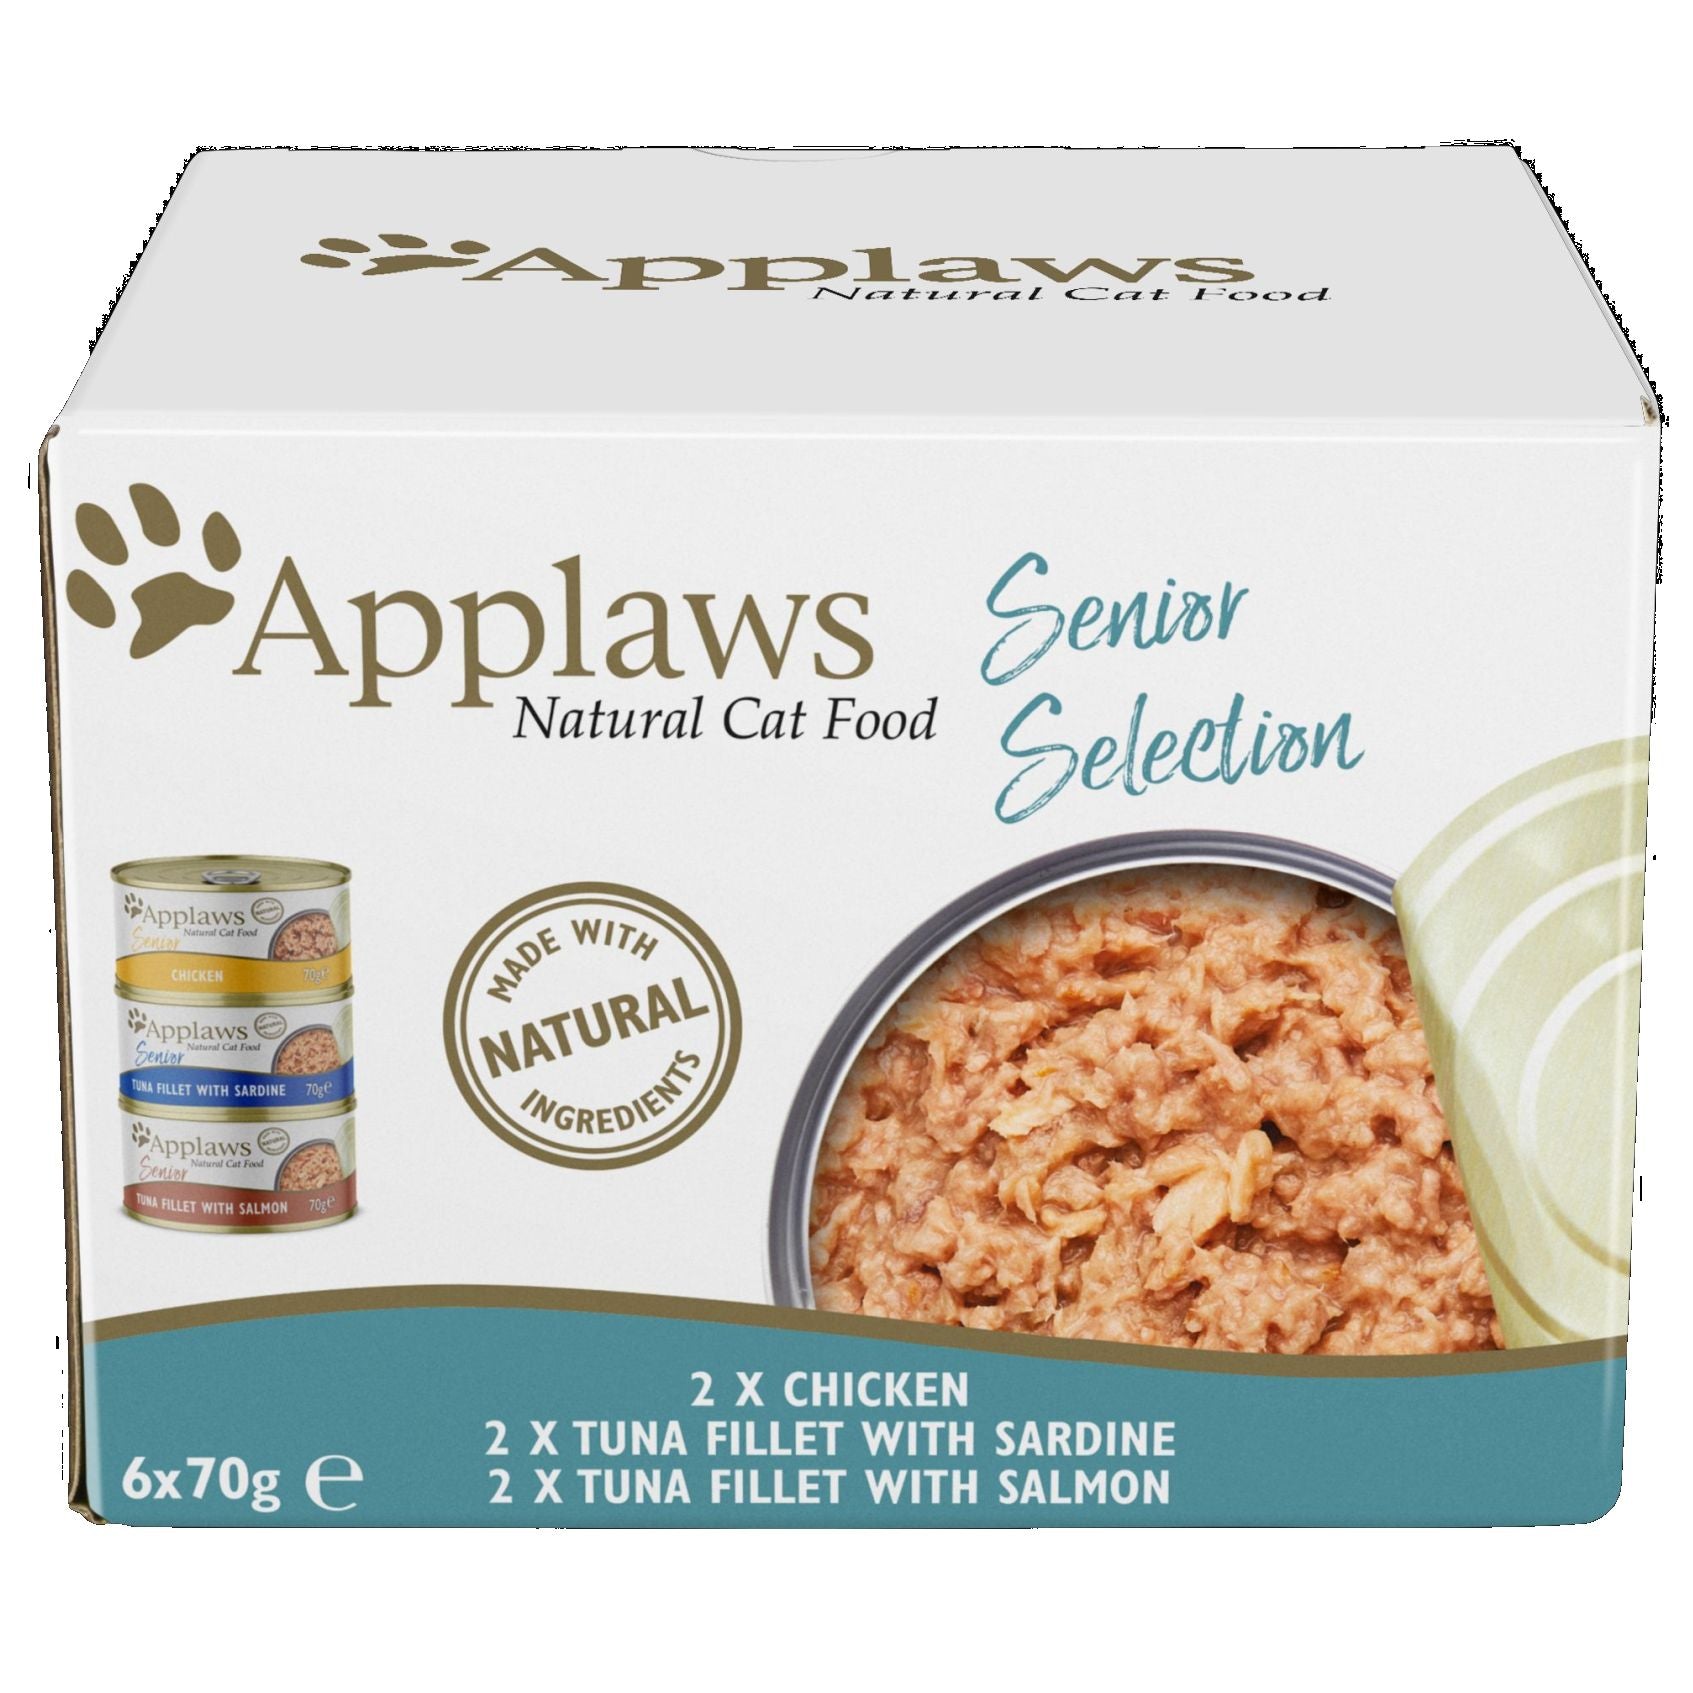 Applaws senior multipack selection 6 x 70g tins